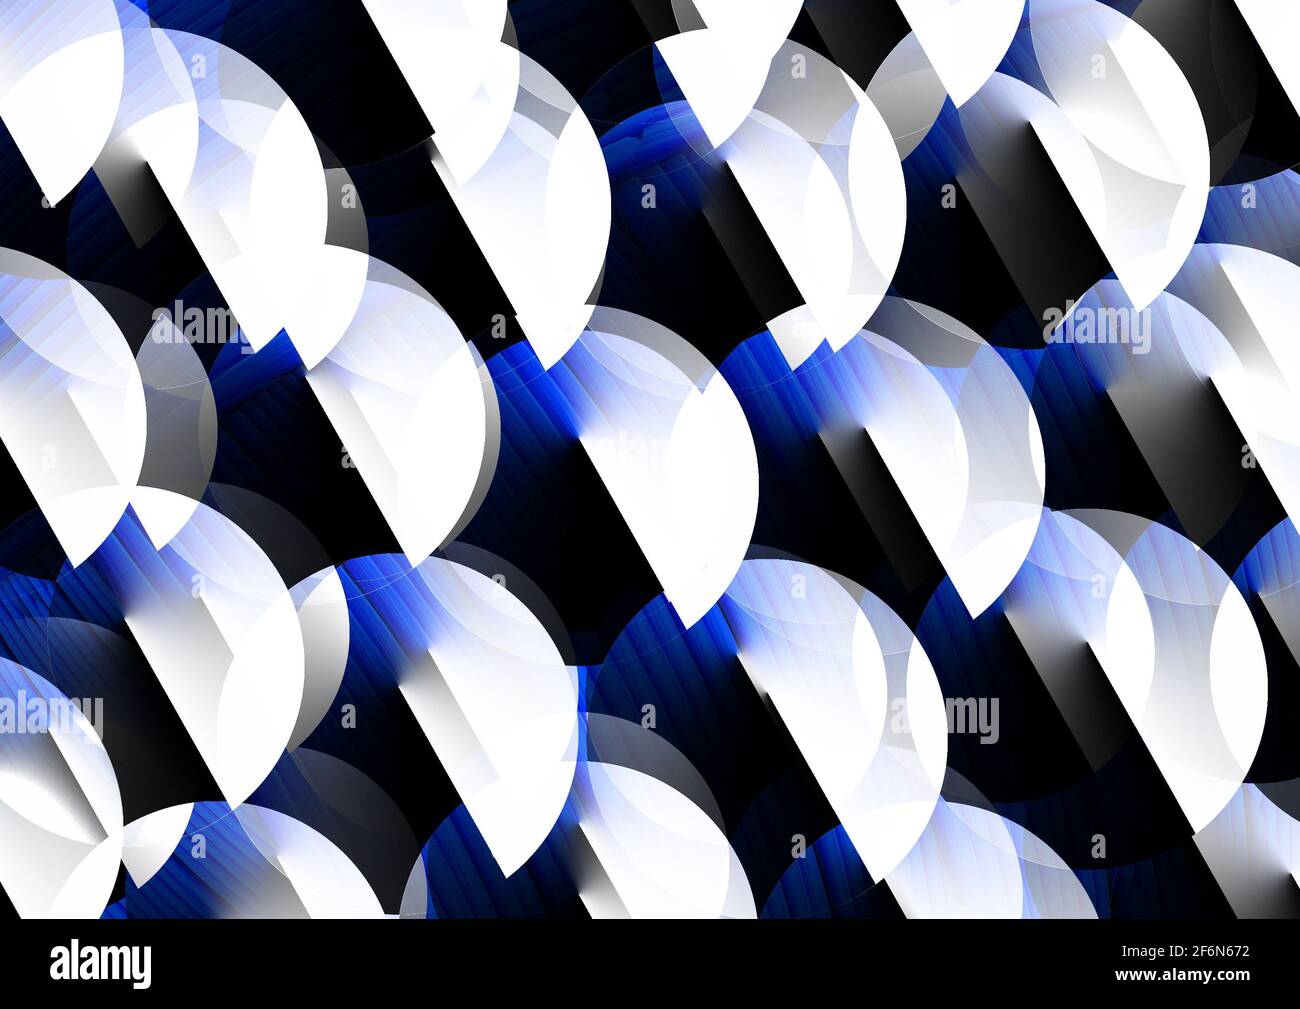 Blue Abstract Gradated Background image Stock Photo